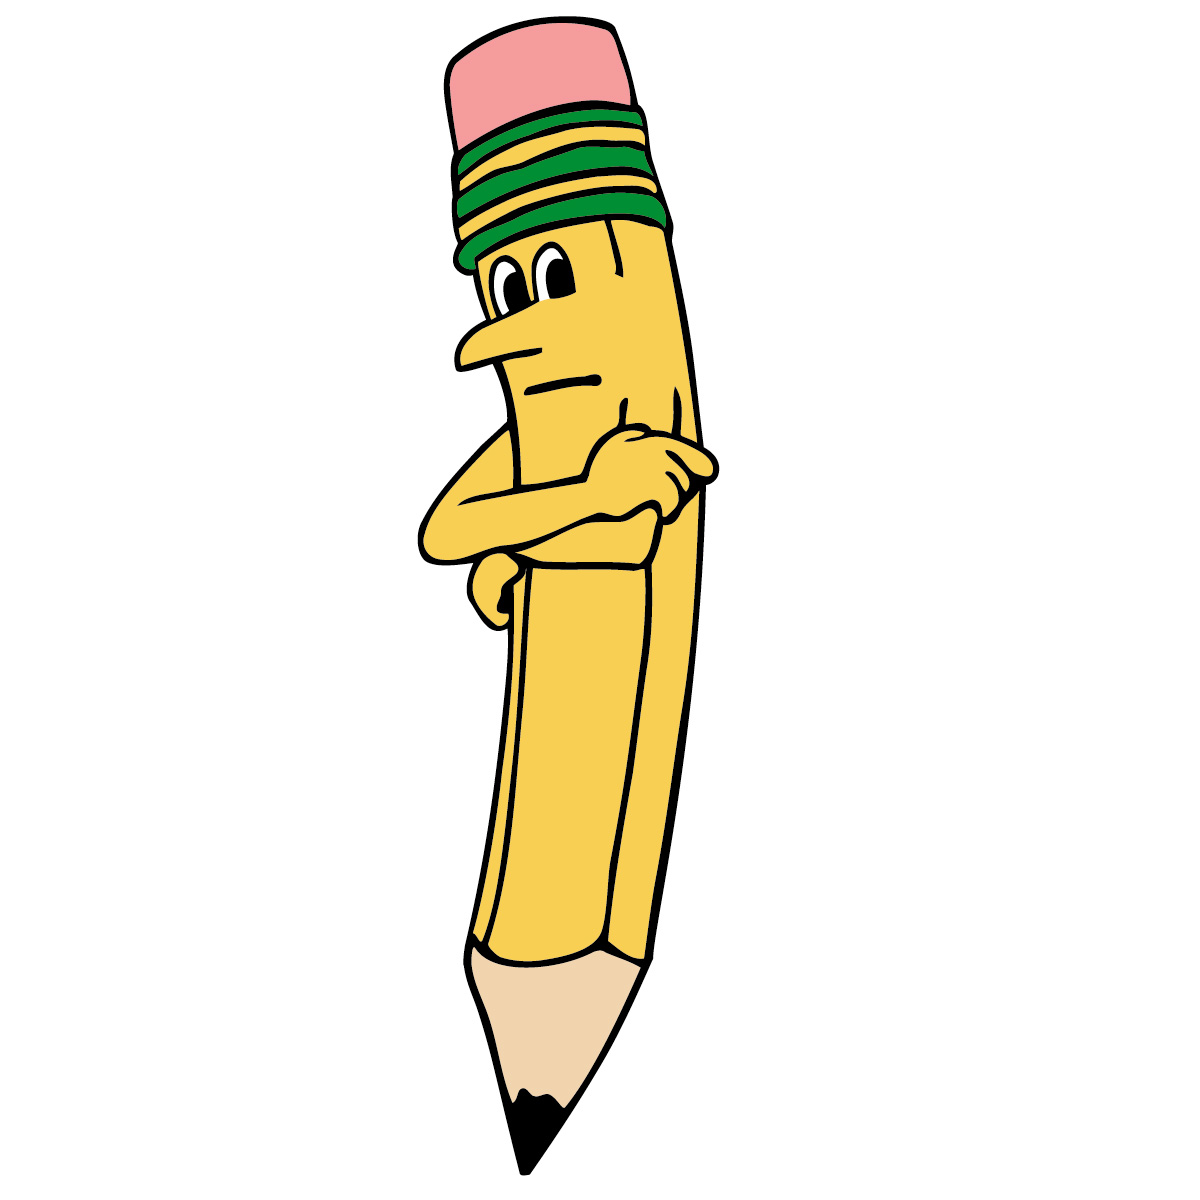 Animated Pencil - ClipArt Best